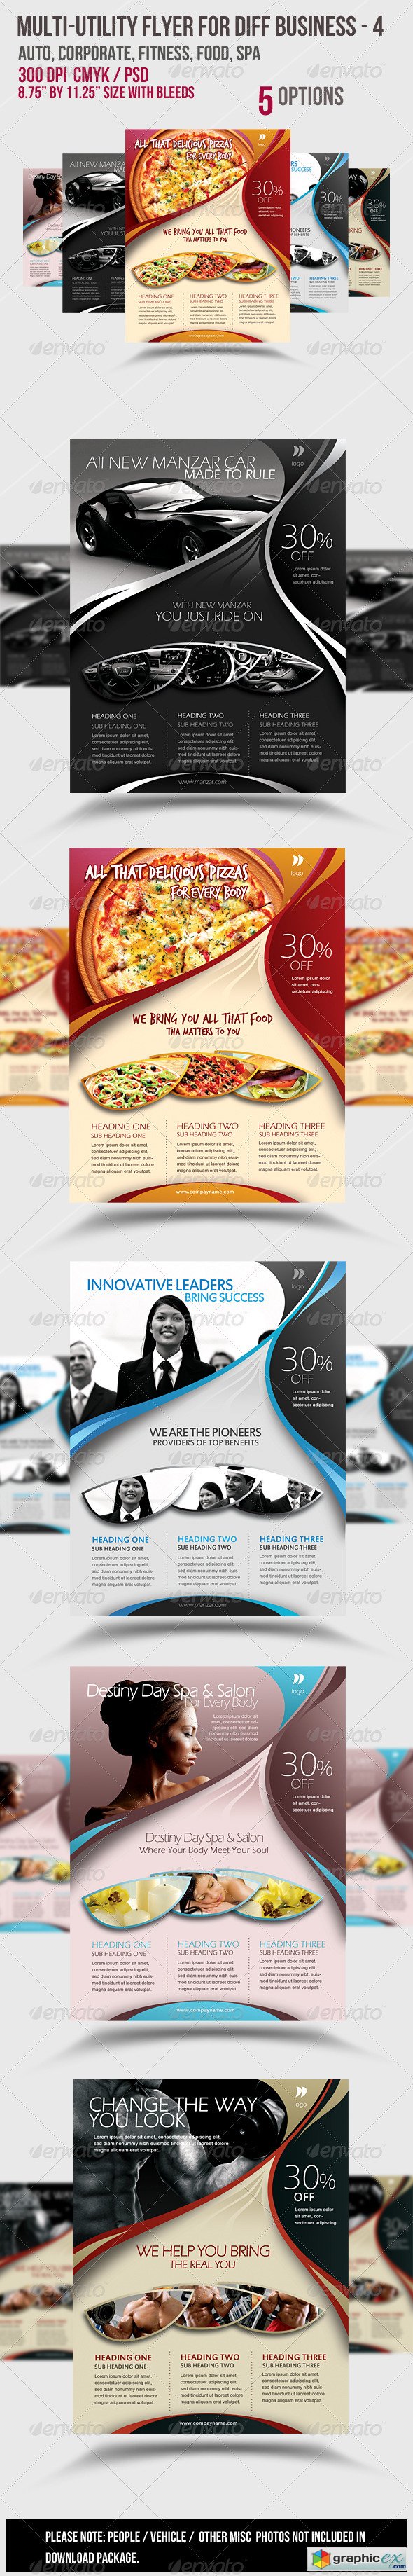 Multi-utility Flyer For Different Business - 4